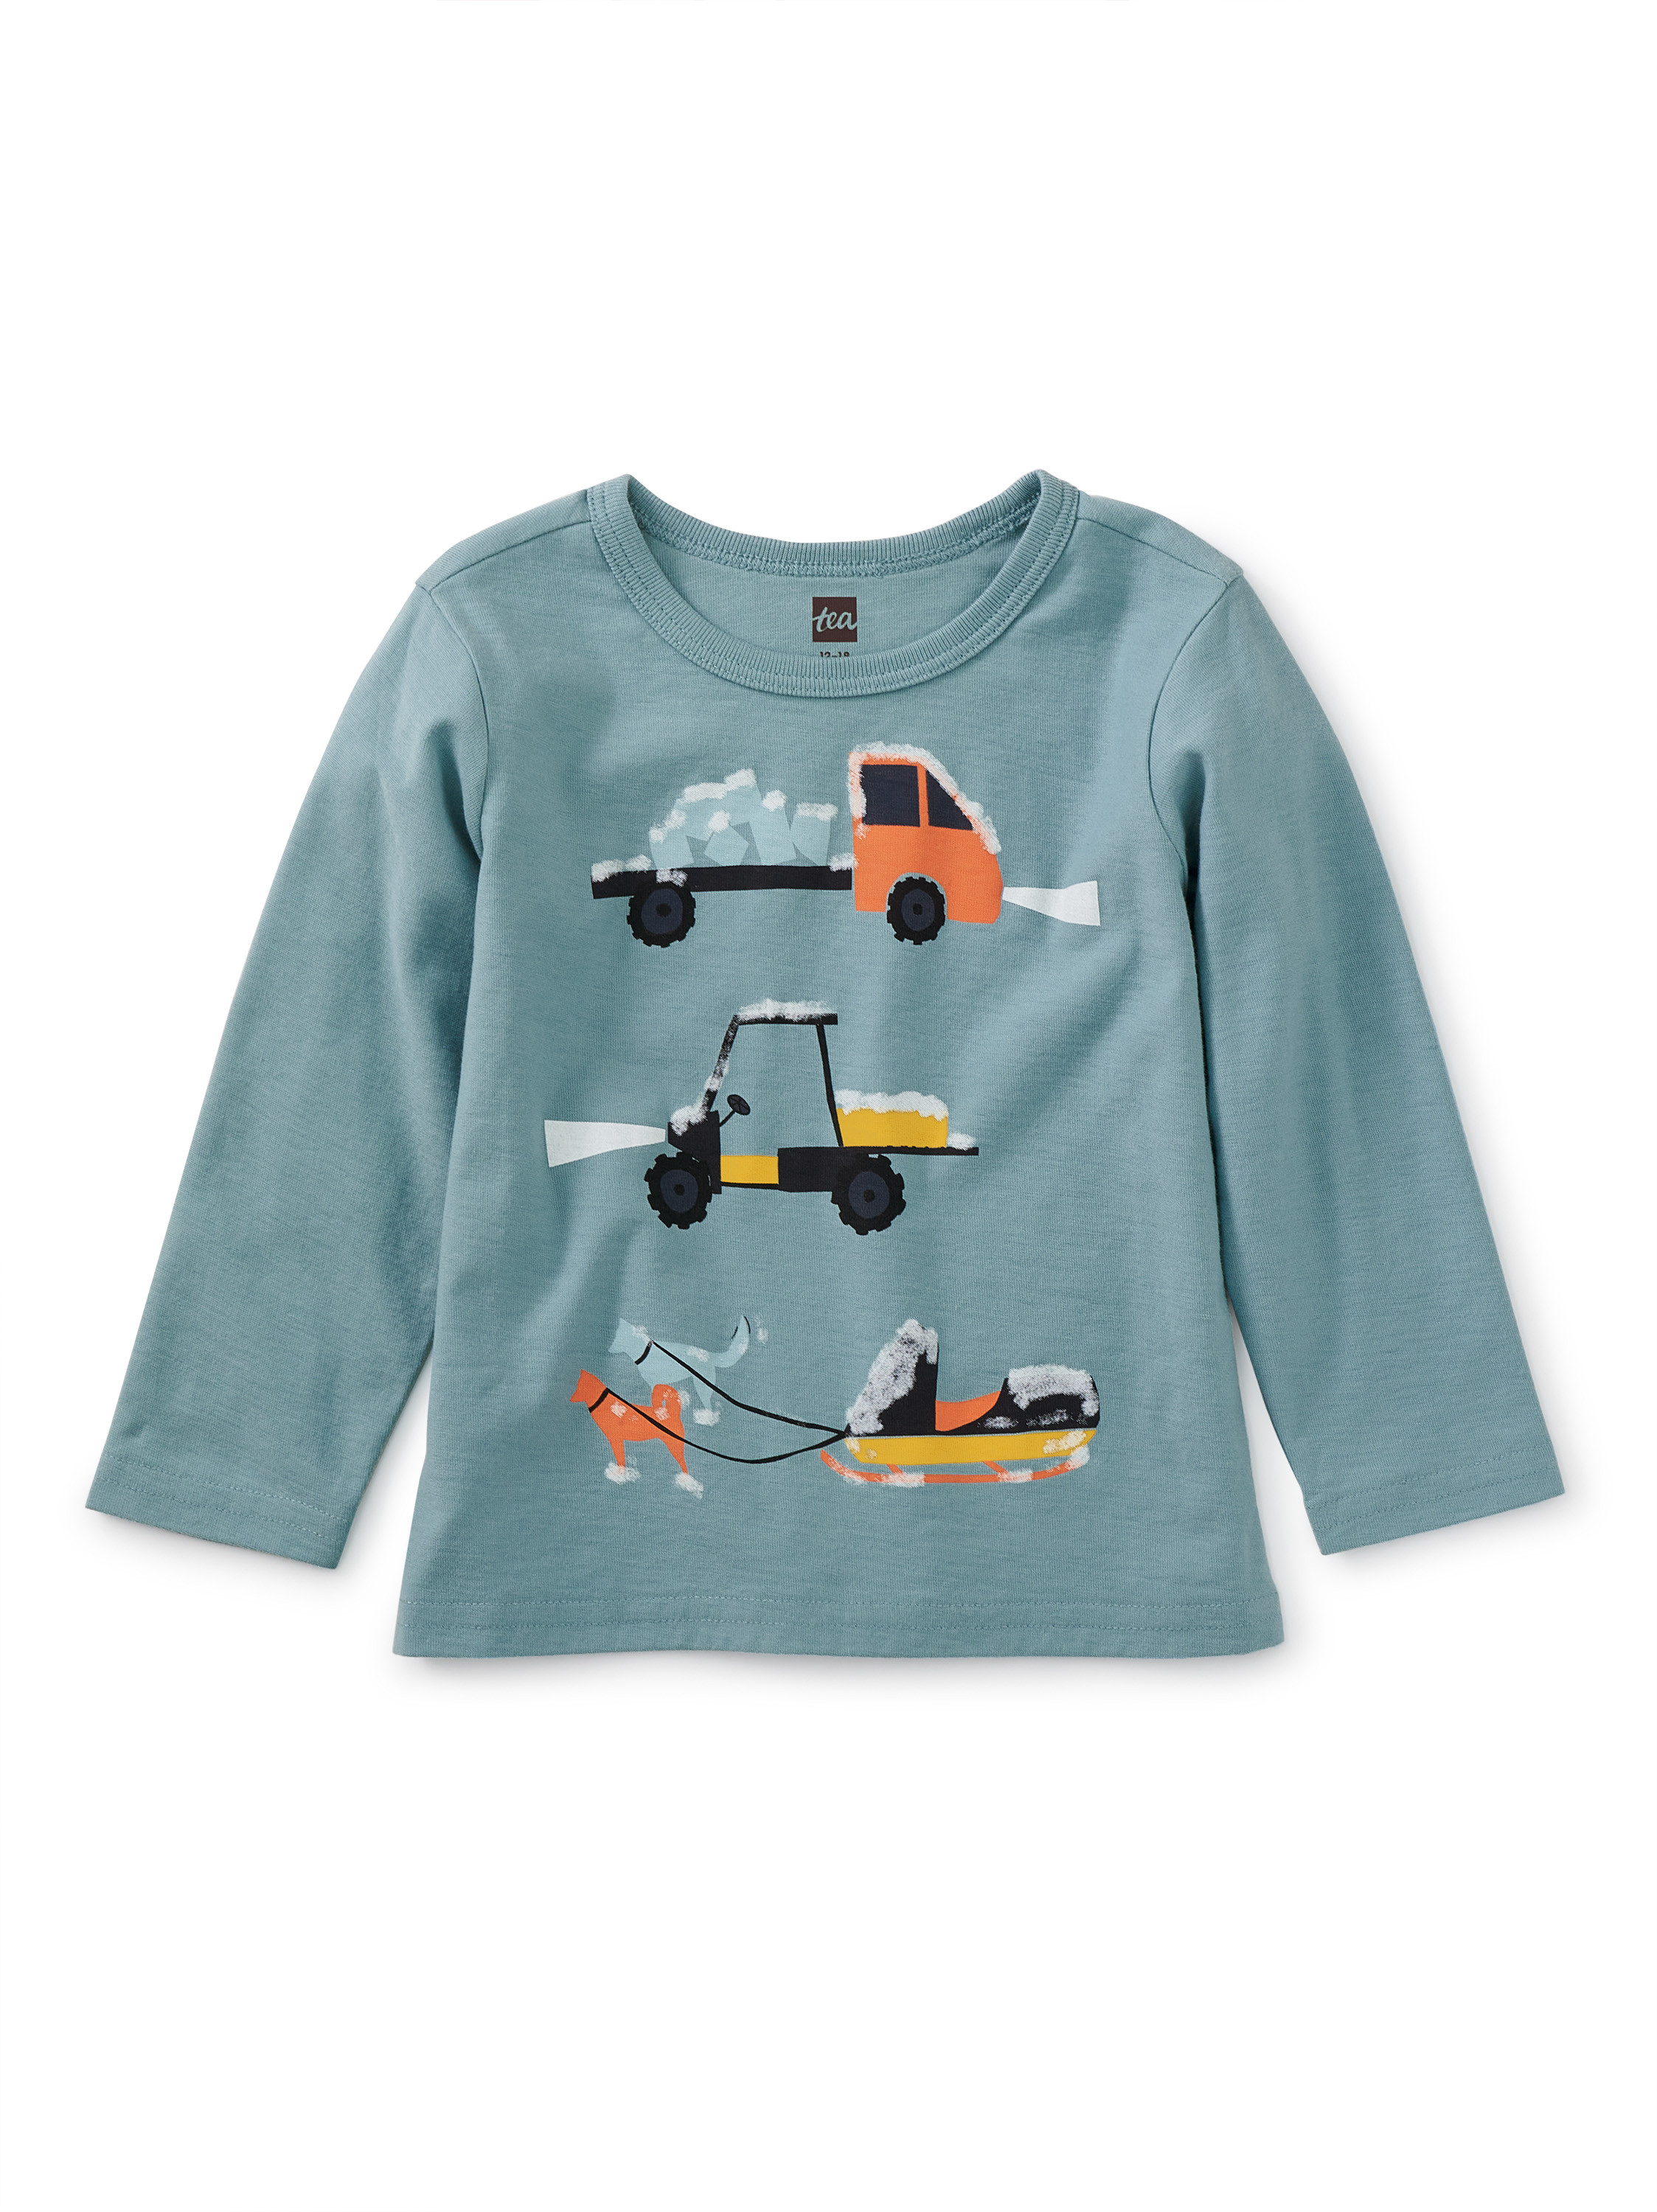 Winter Wheels Baby Graphic Tee | Tea Collection